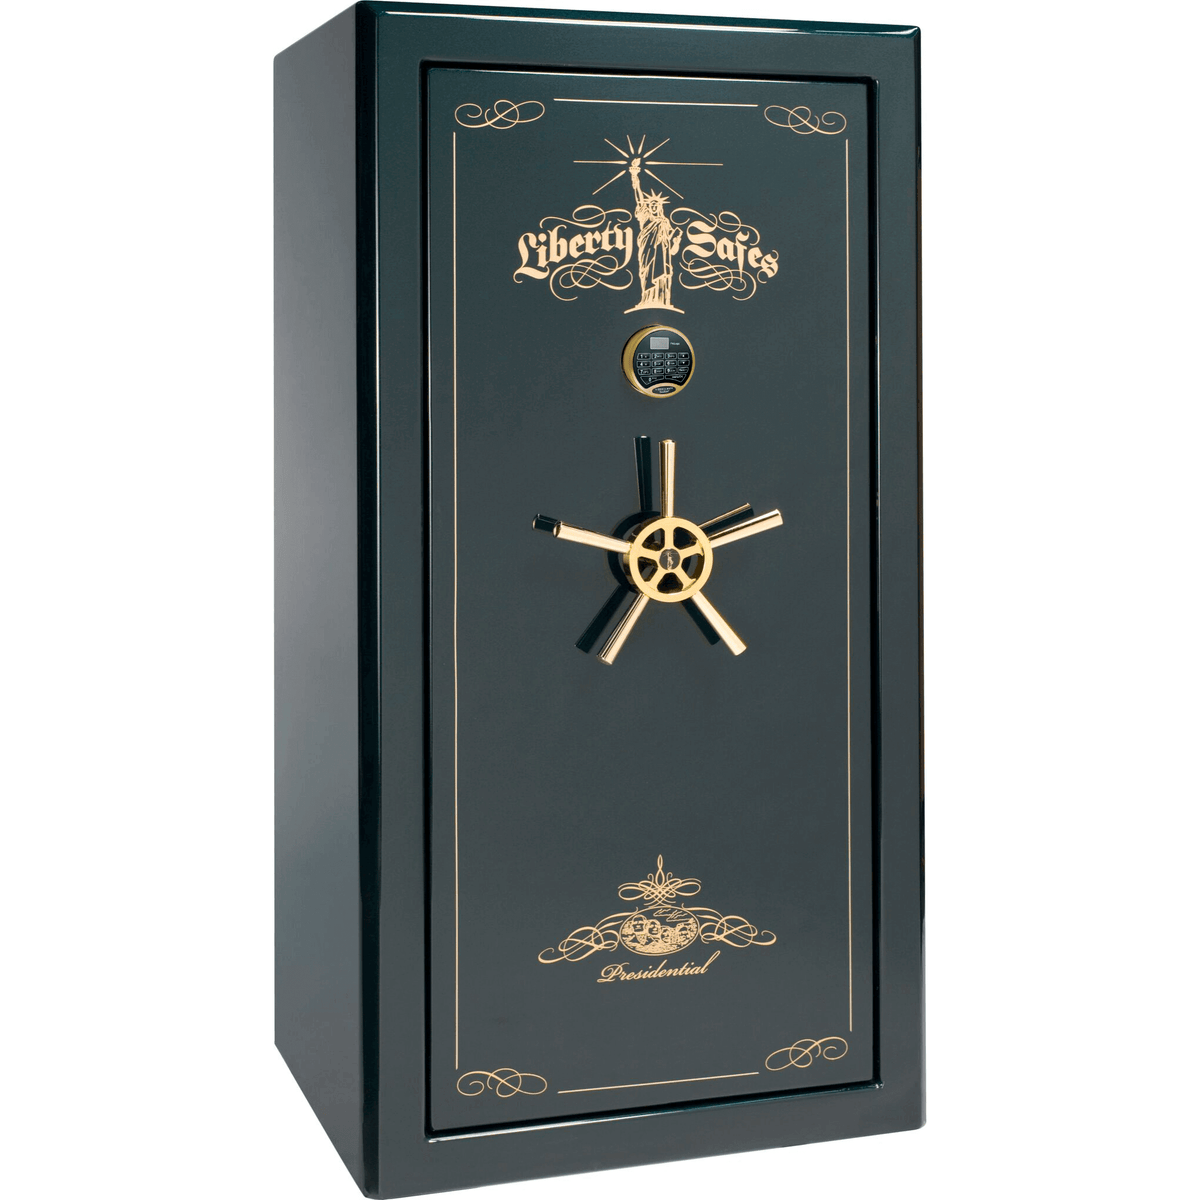 Liberty Safe Presidential 25 in Emerald Green with 24k Gold Electronic Lock, closed door.